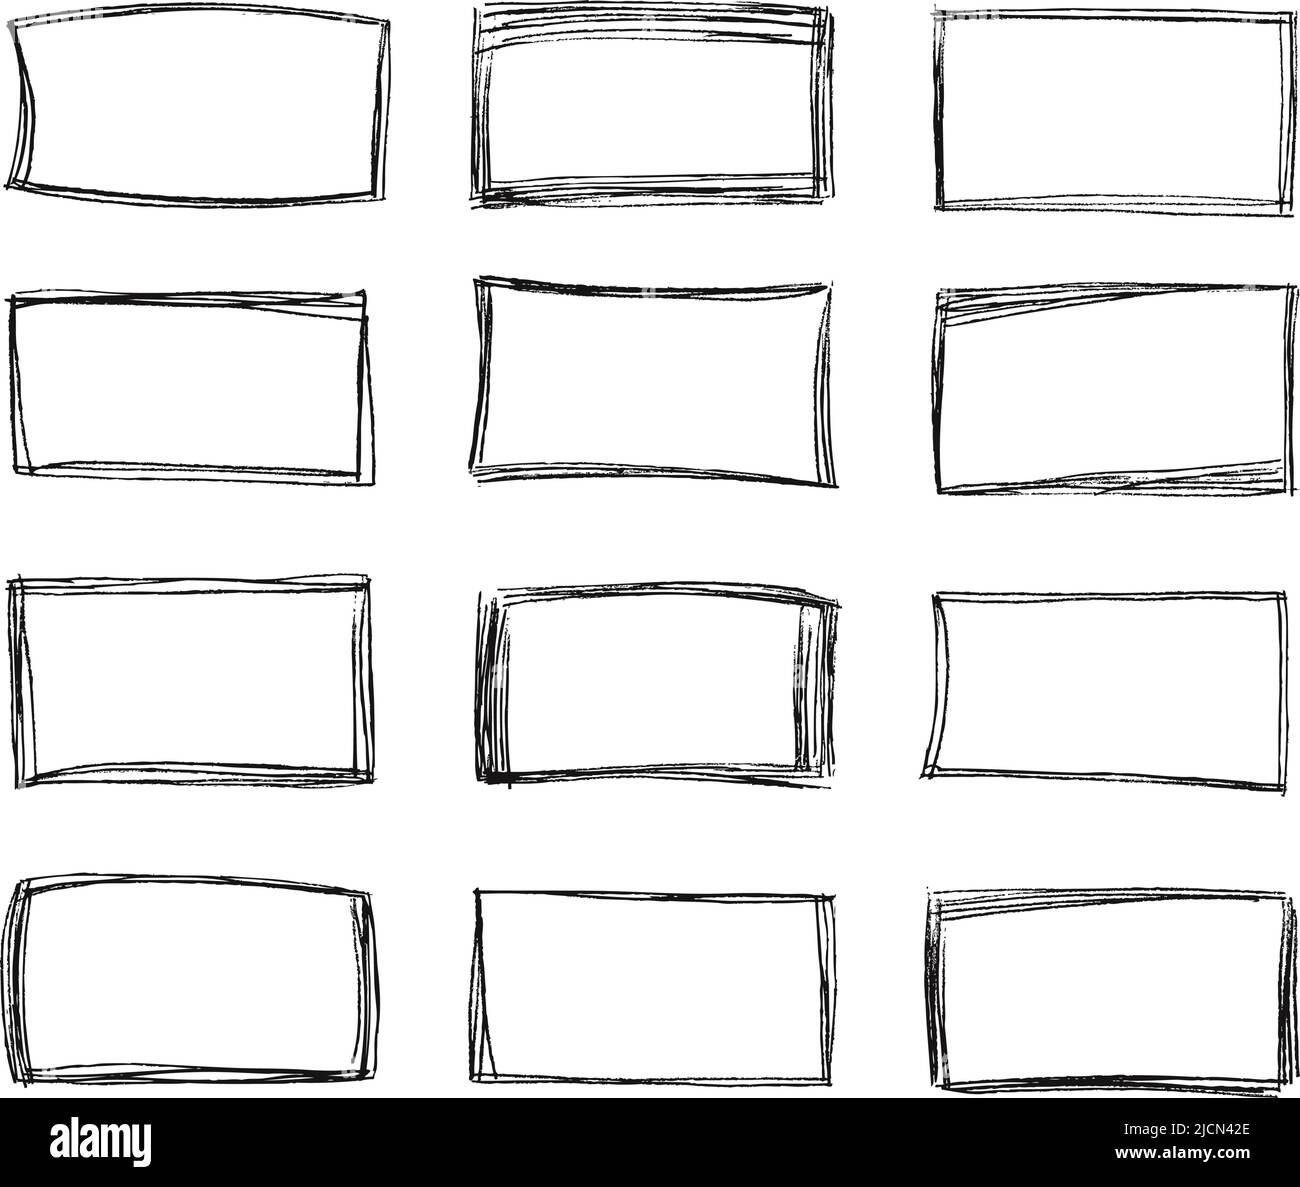 How to Draw an Impossible Square or Rectangle  Easy Step by Step Drawing  Tutorial  How to Draw Step by Step Drawing Tutorials  Drawing tutorial  easy Illusion drawings Impossible square